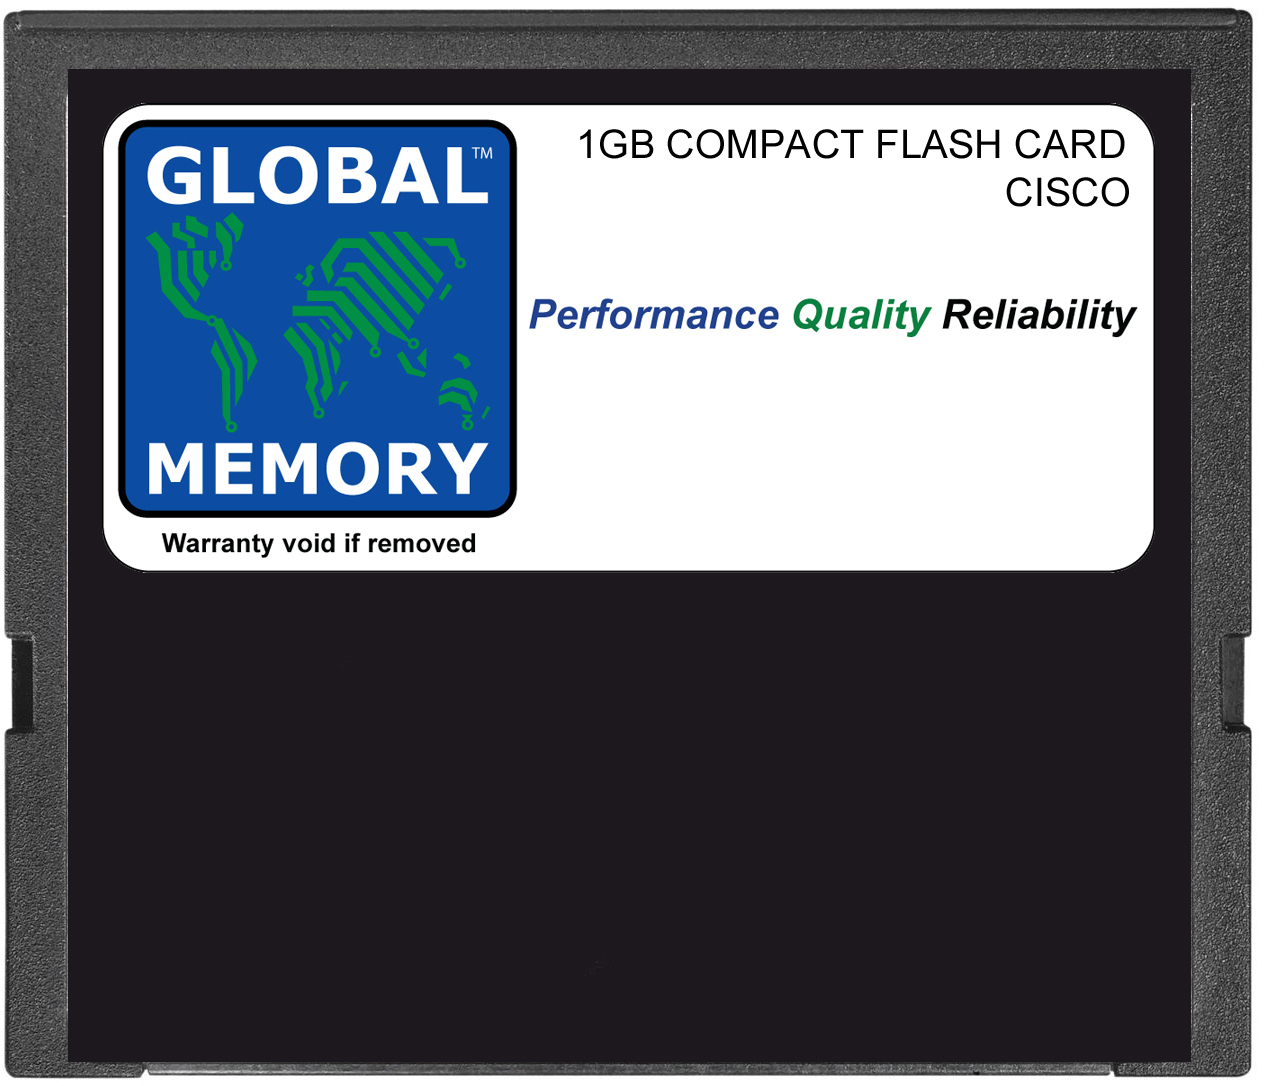 1GB COMPACT FLASH CARD MEMORY FOR CISCO 10000 SERIES ROUTERS PRE-3 PERFORMANCE ROUTING ENGINE (MEM-10K-CPTFL1G)